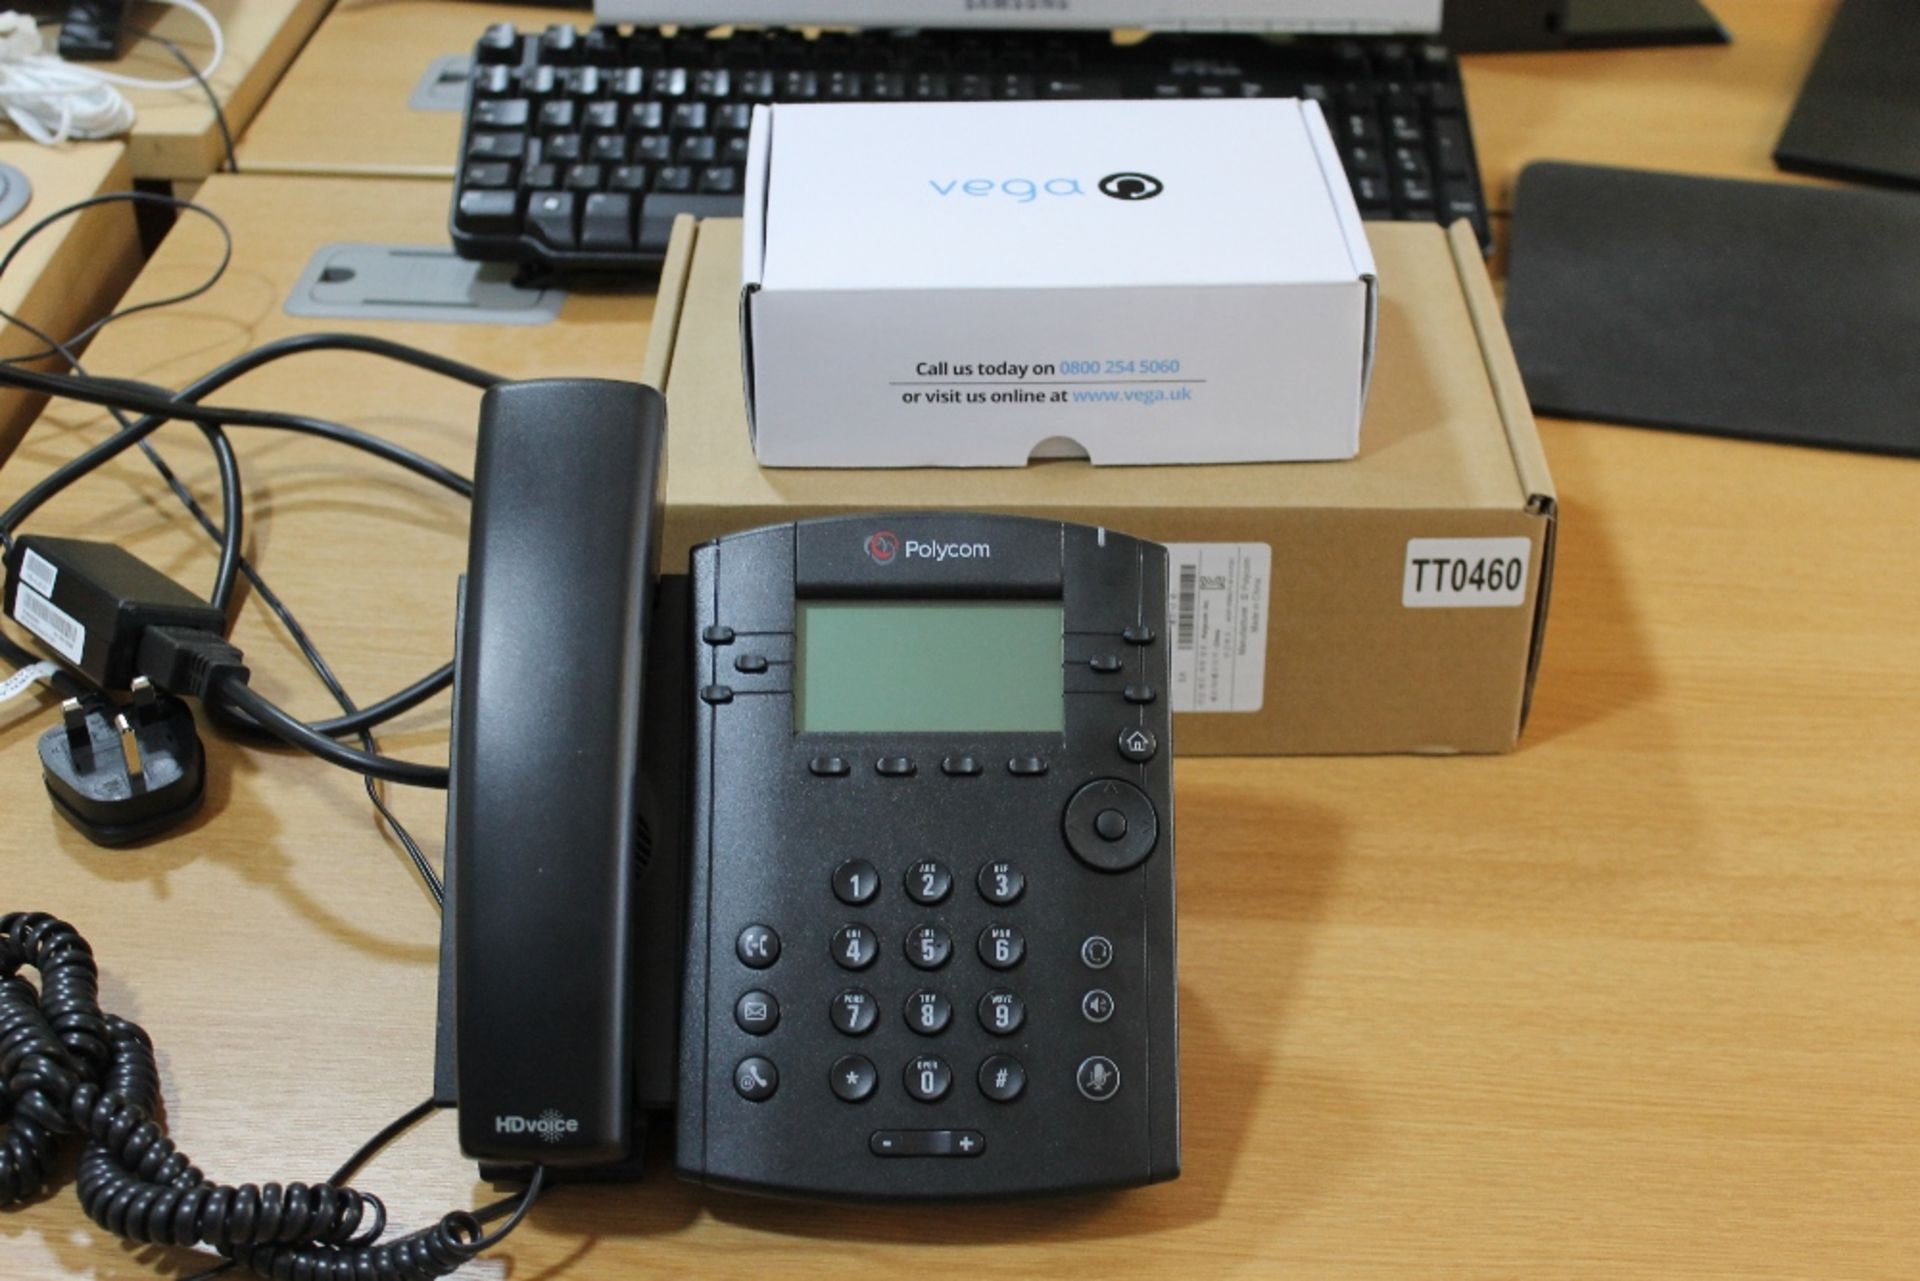 VVX 301 Desktop Telephone – VOIP + VEGA Head Set – Both As New This super machine was purchased by